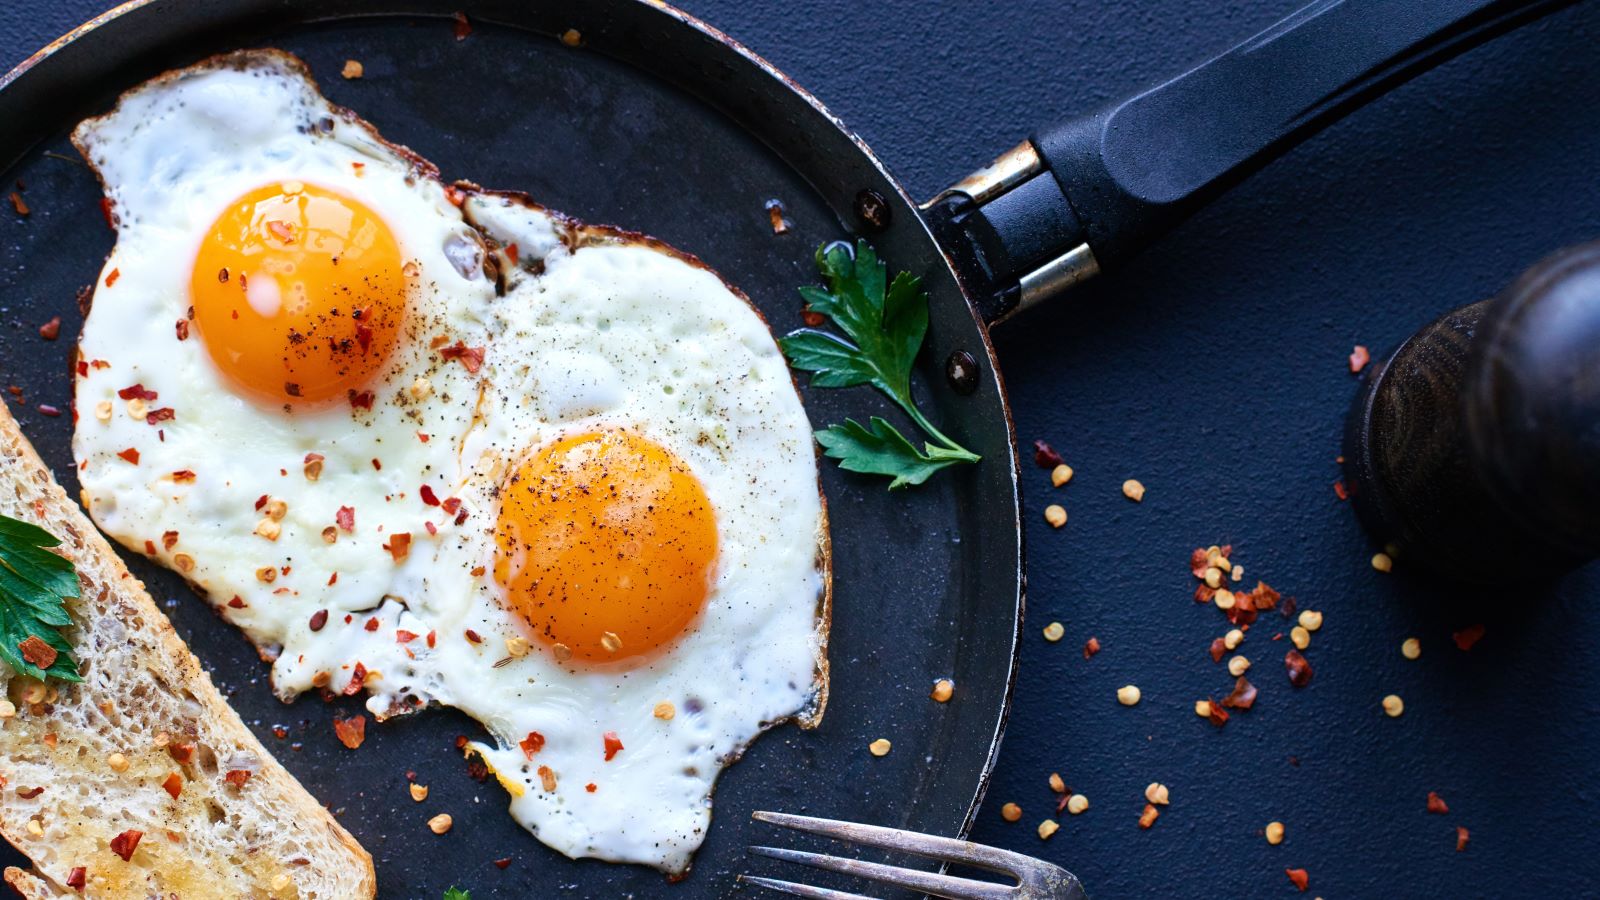 Can I Eat Eggs If My Cholesterol Is High?